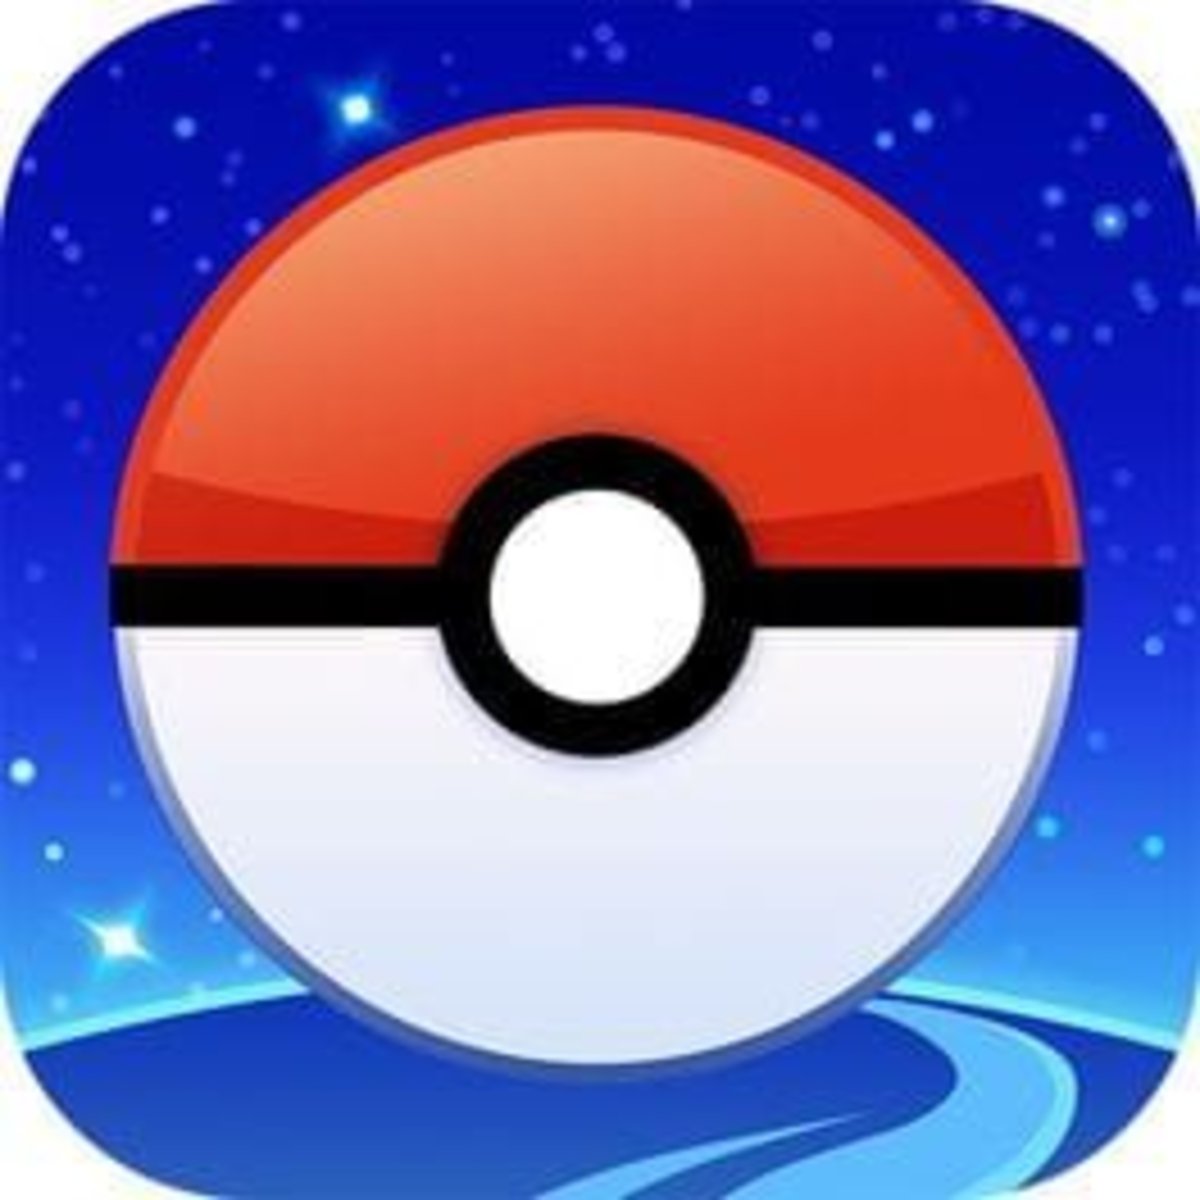 Pokémon GO announces the first Series of Regional and International Championships